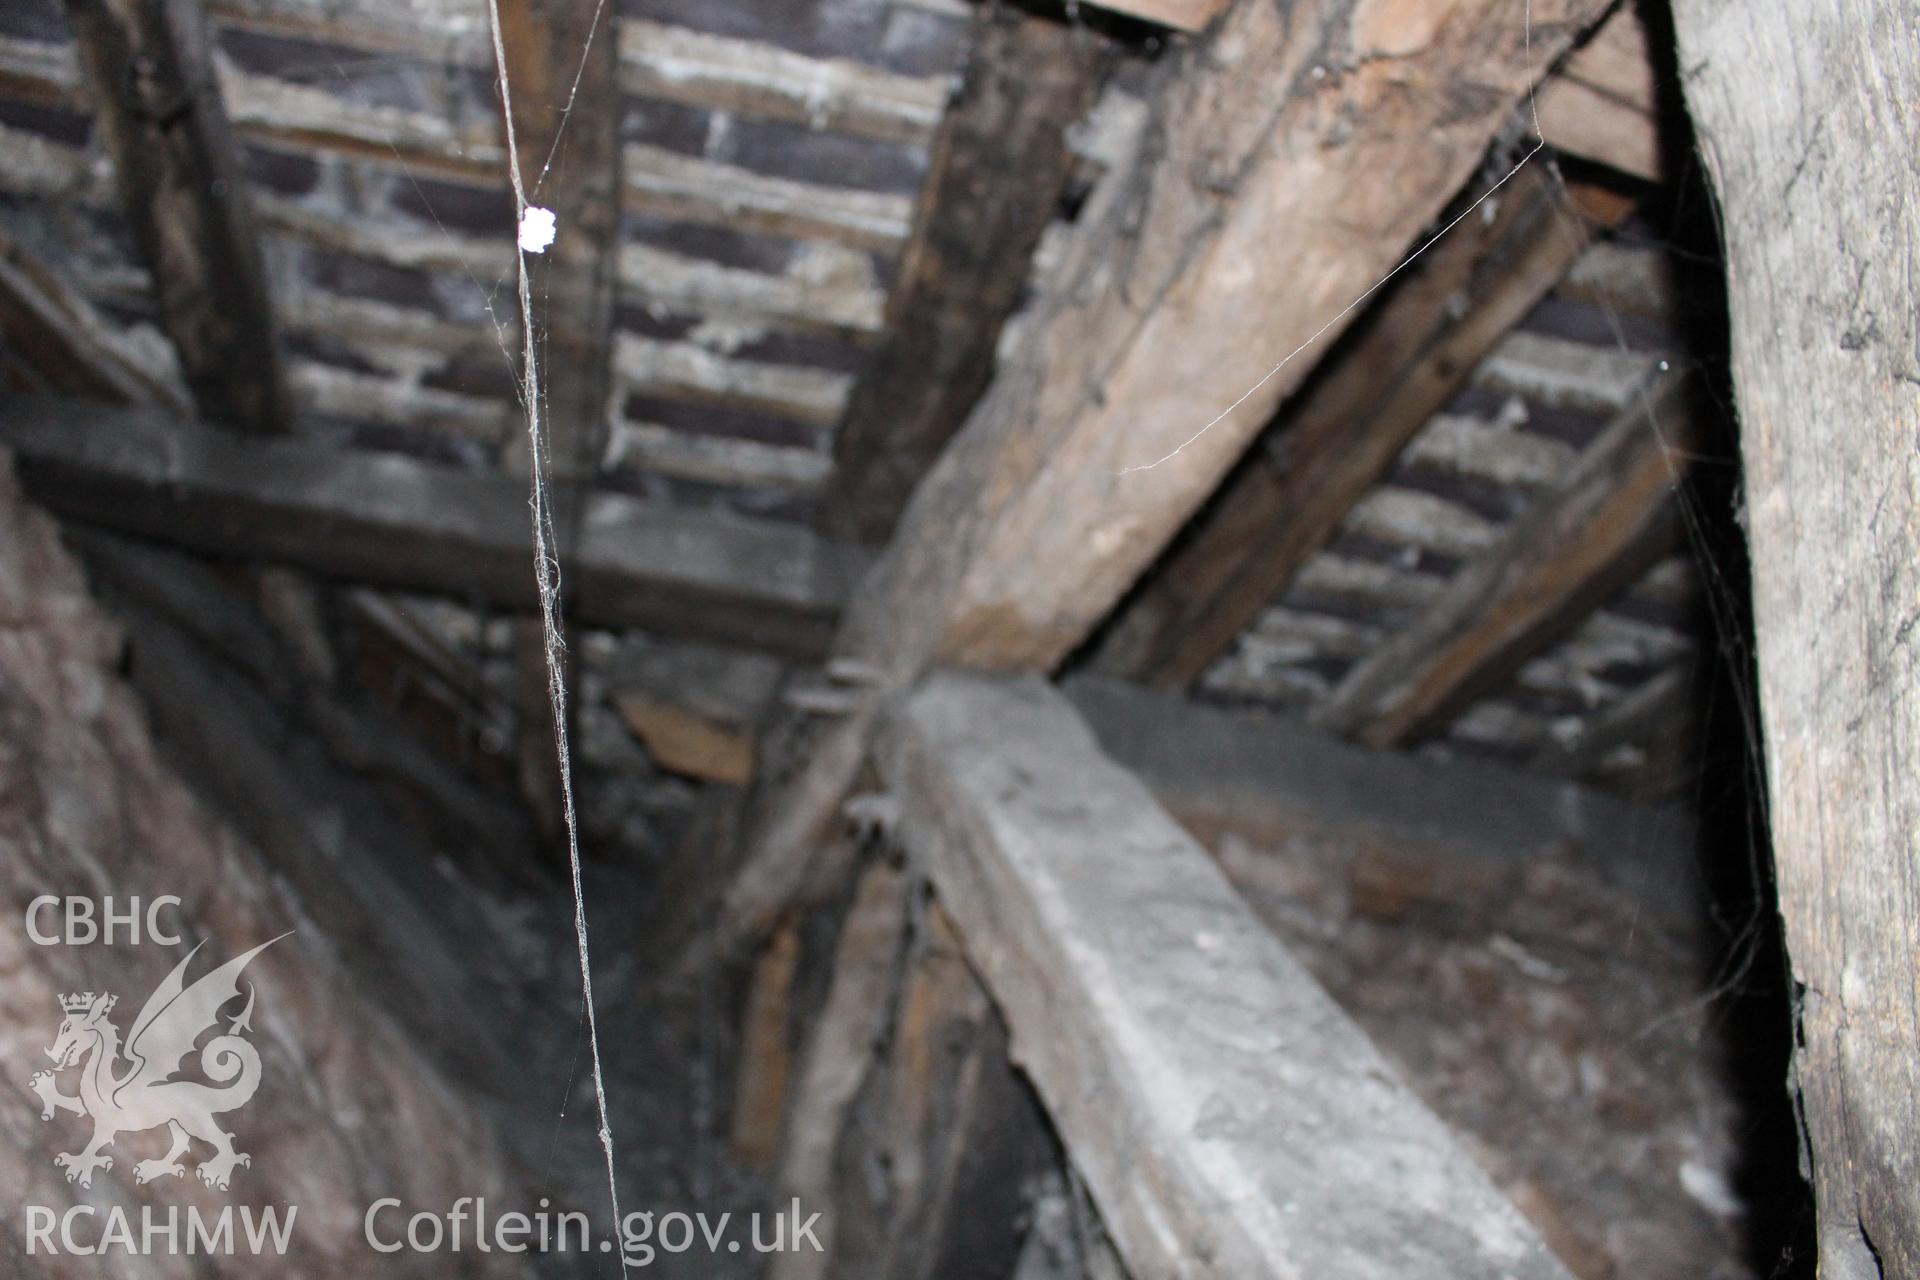 Colour photograph showing detail of insulating wool and timber roof frame at 5-7 Mwrog Street, Ruthin. Photographed during survey conducted by Geoff Ward on 14th May 2014.